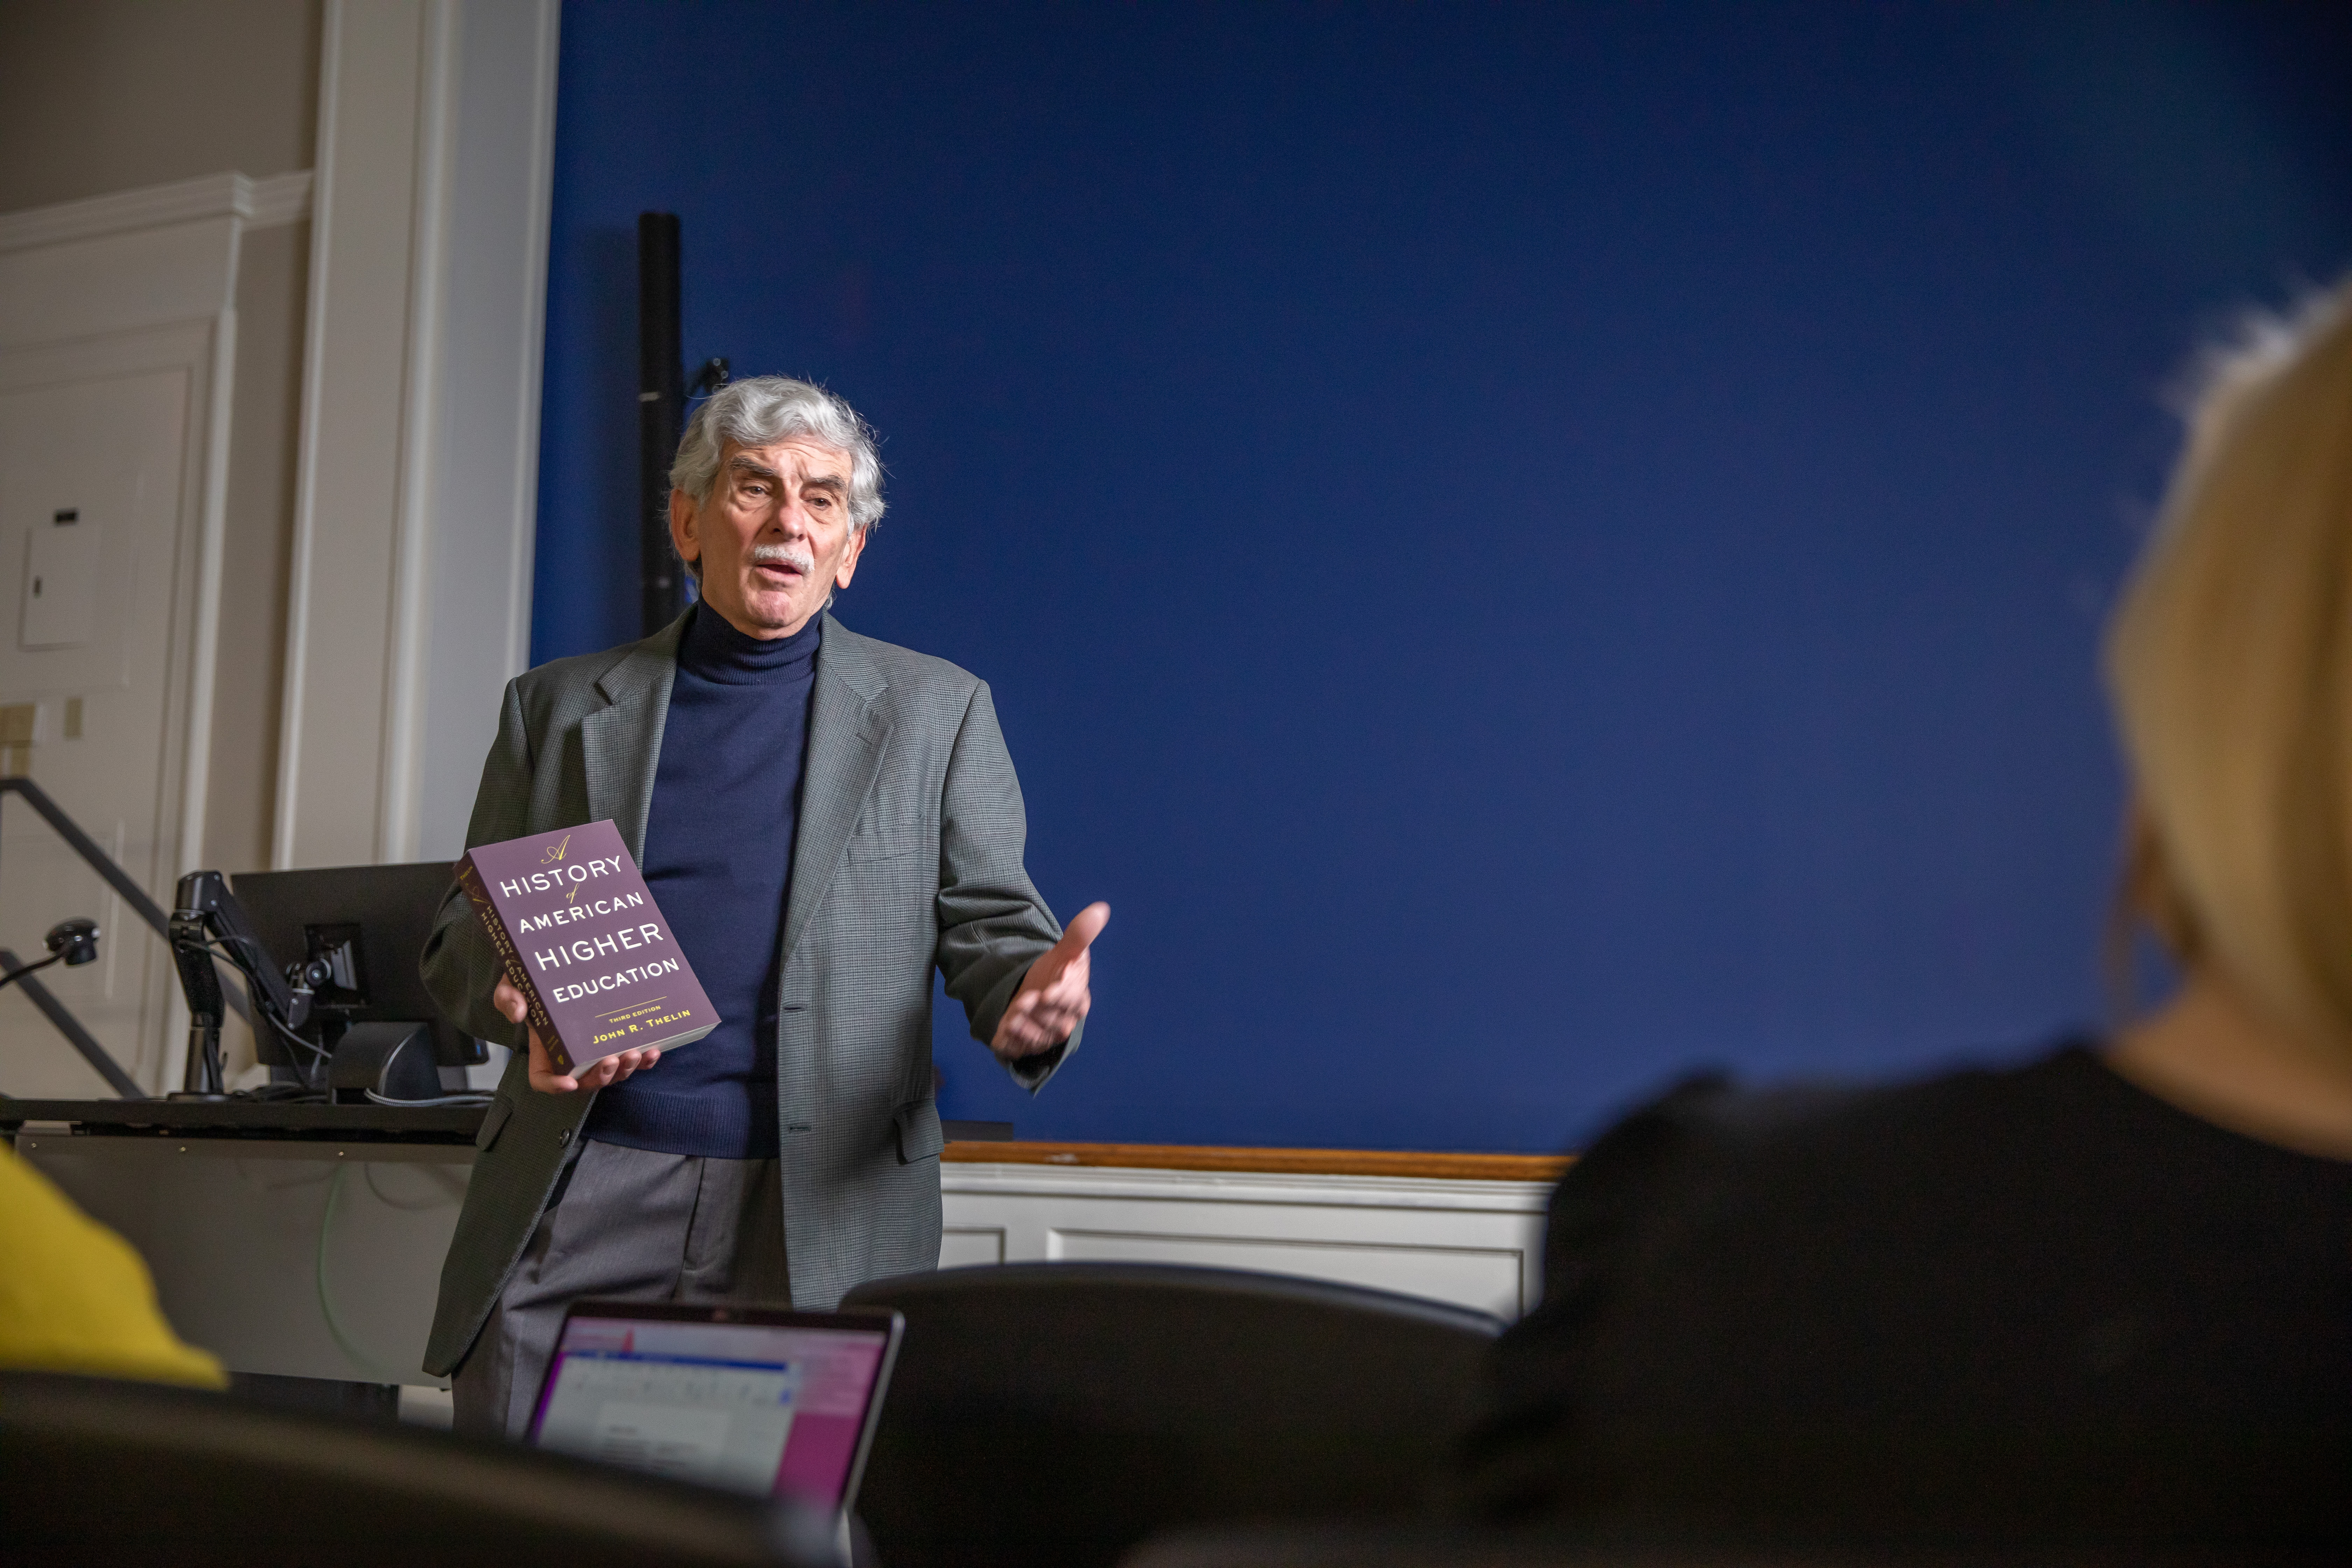 Photo of a man holding a textbook while speaking at the front of a room